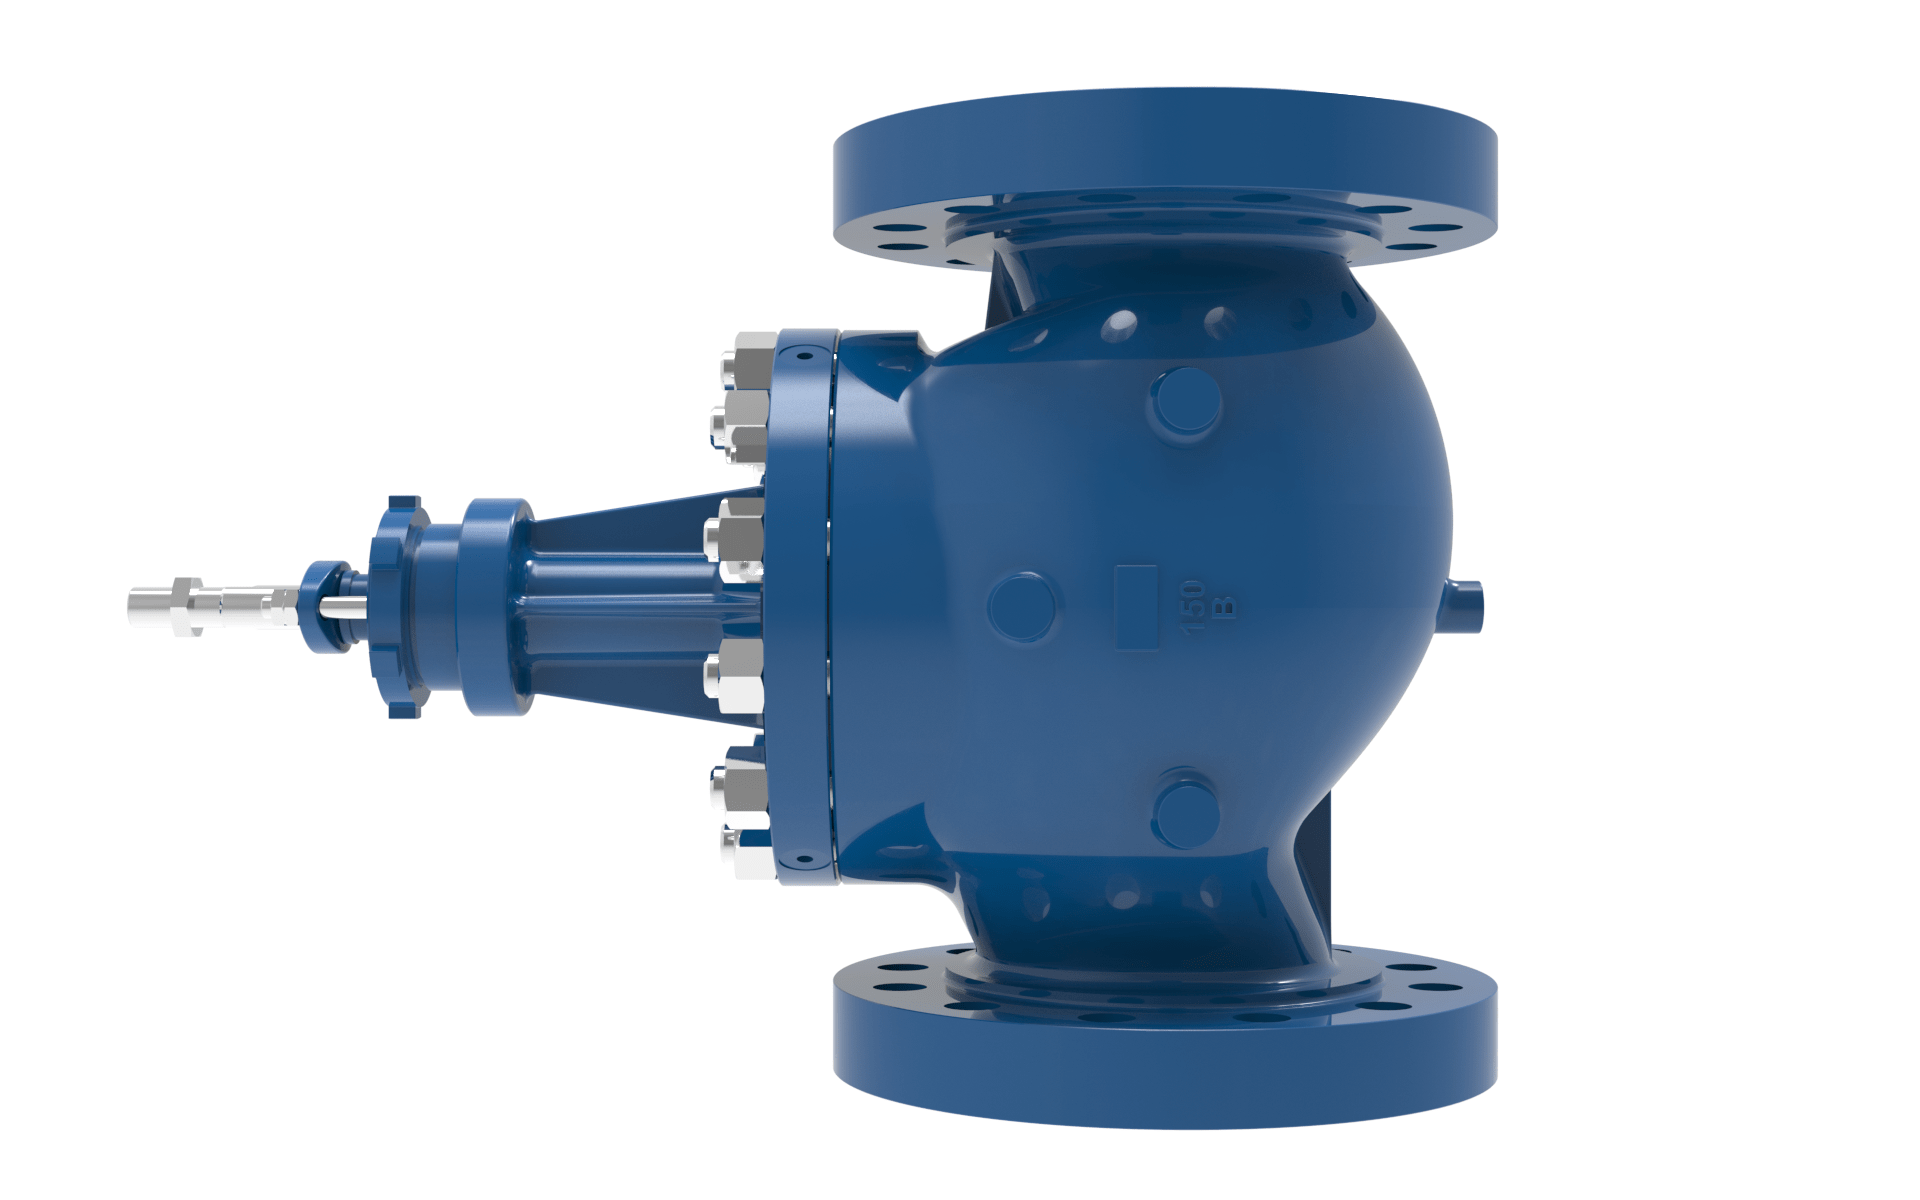 BLAKEBOROUGH® BV500 CAGE TRIM VALVES UP TO CLASS 600LB RATING left side view